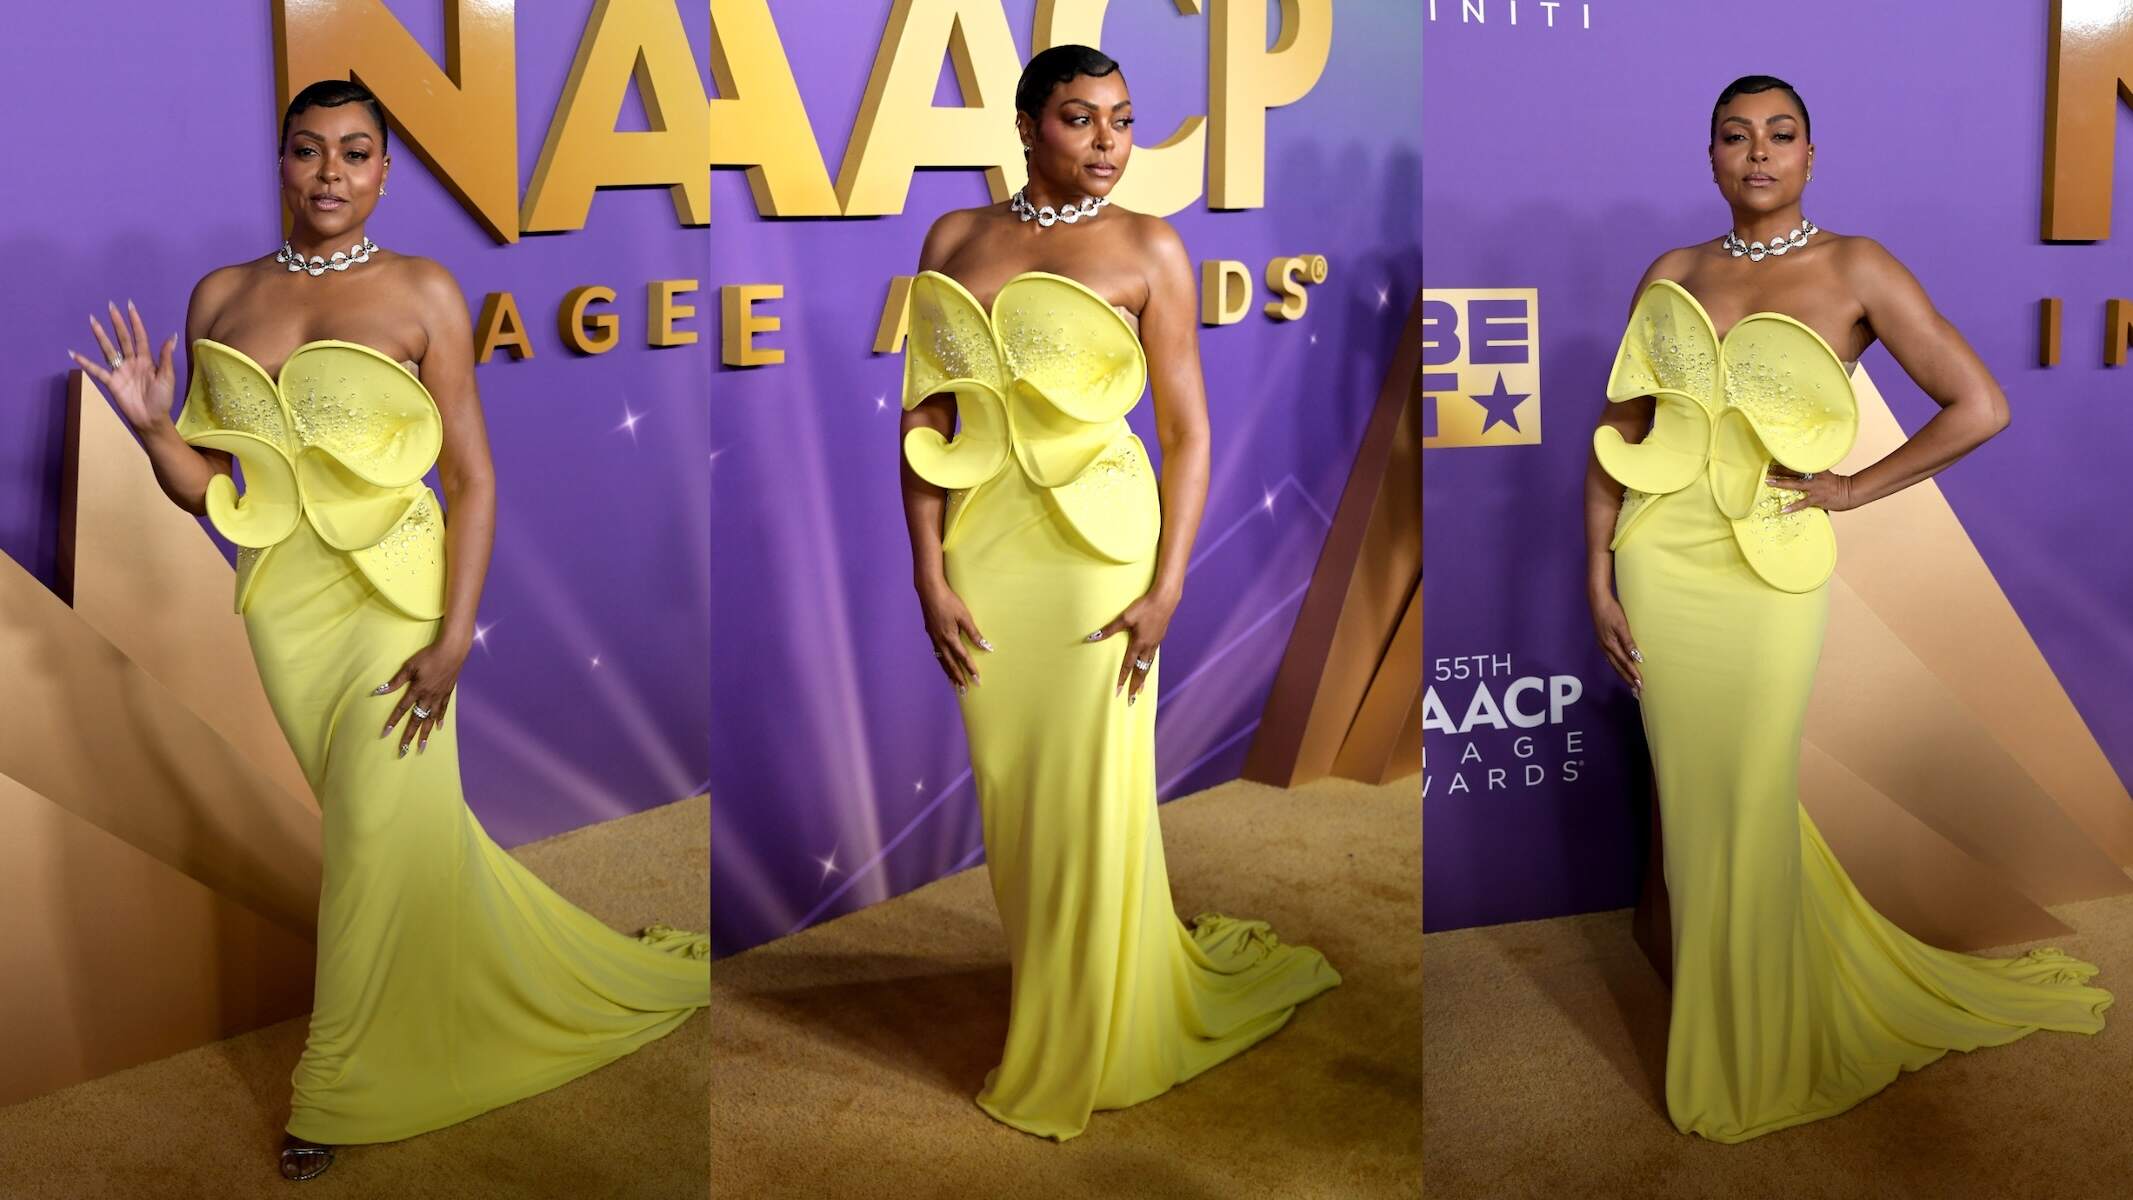 Actor Taraji P. Henson wears a yellow gown on the red carpet at the 55th Annual NAACP Awards